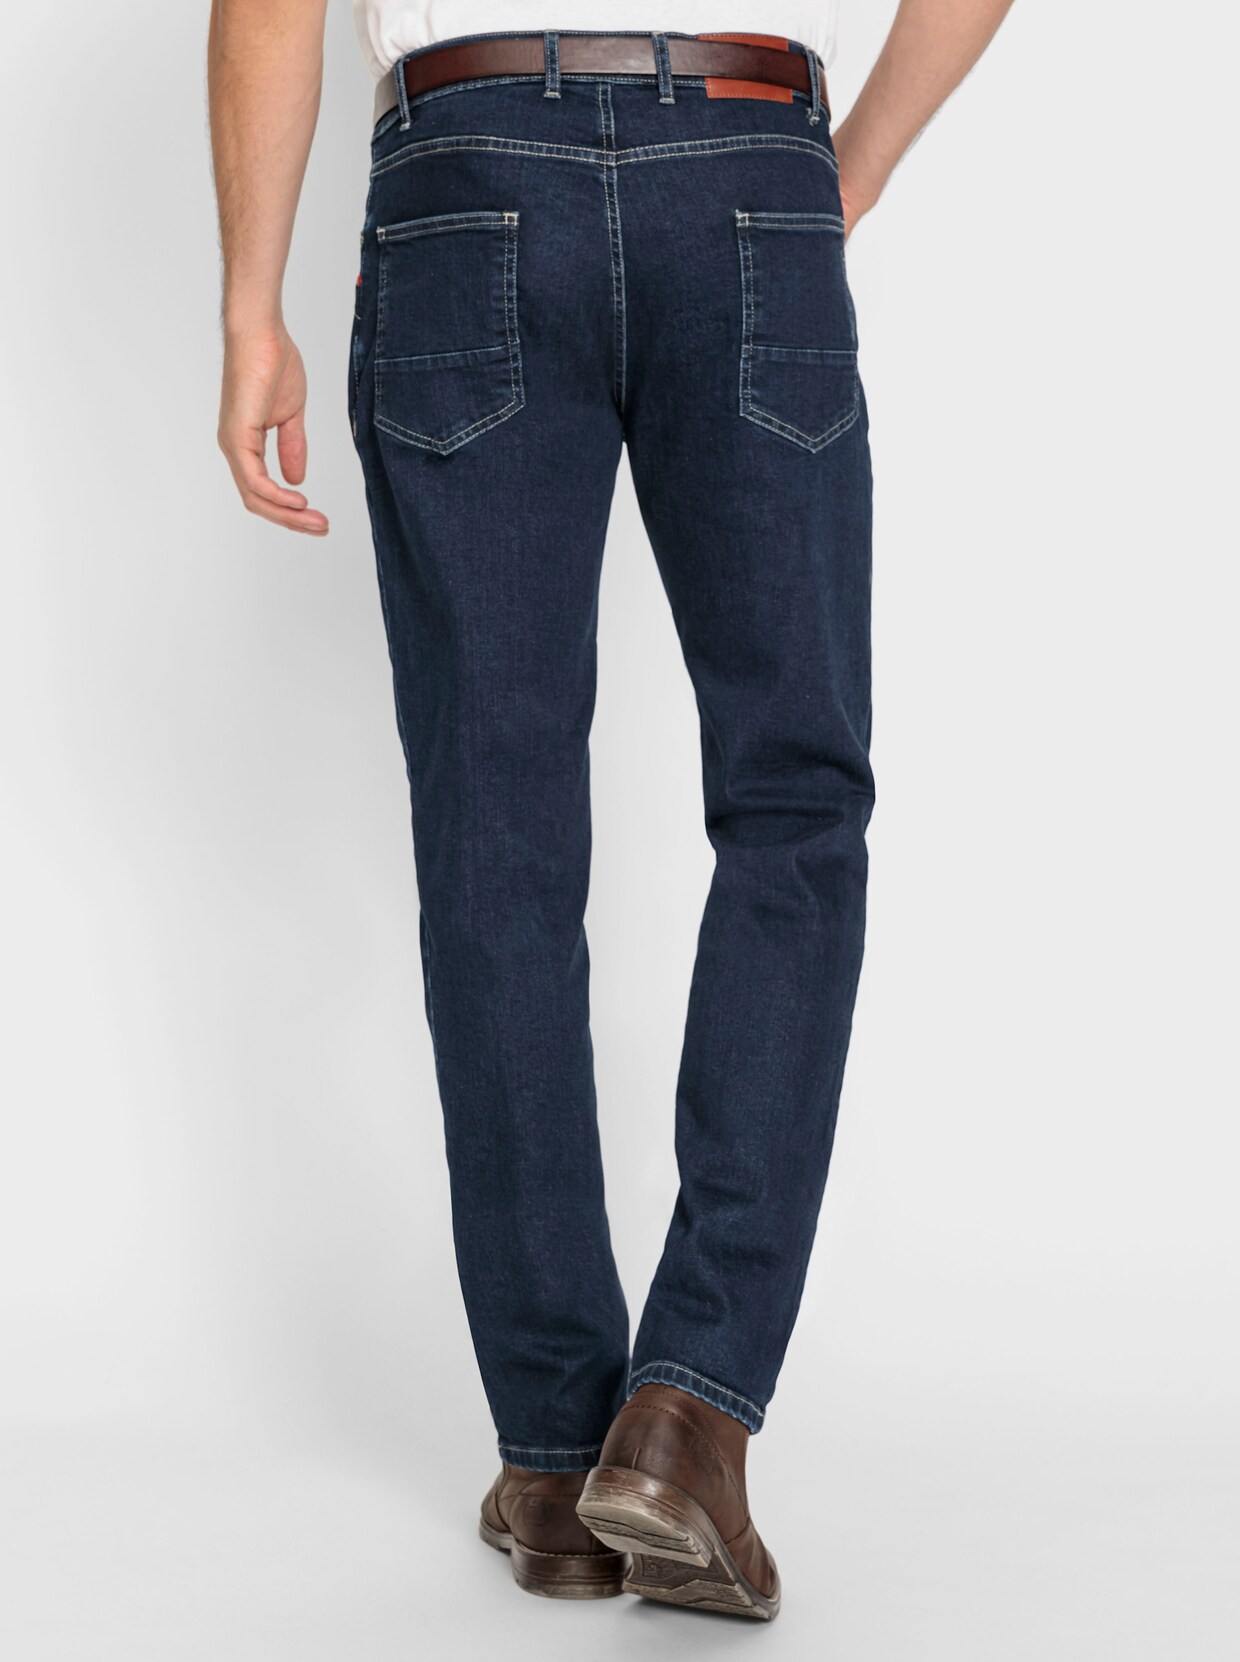 Jeans - darkblue-stone-washed